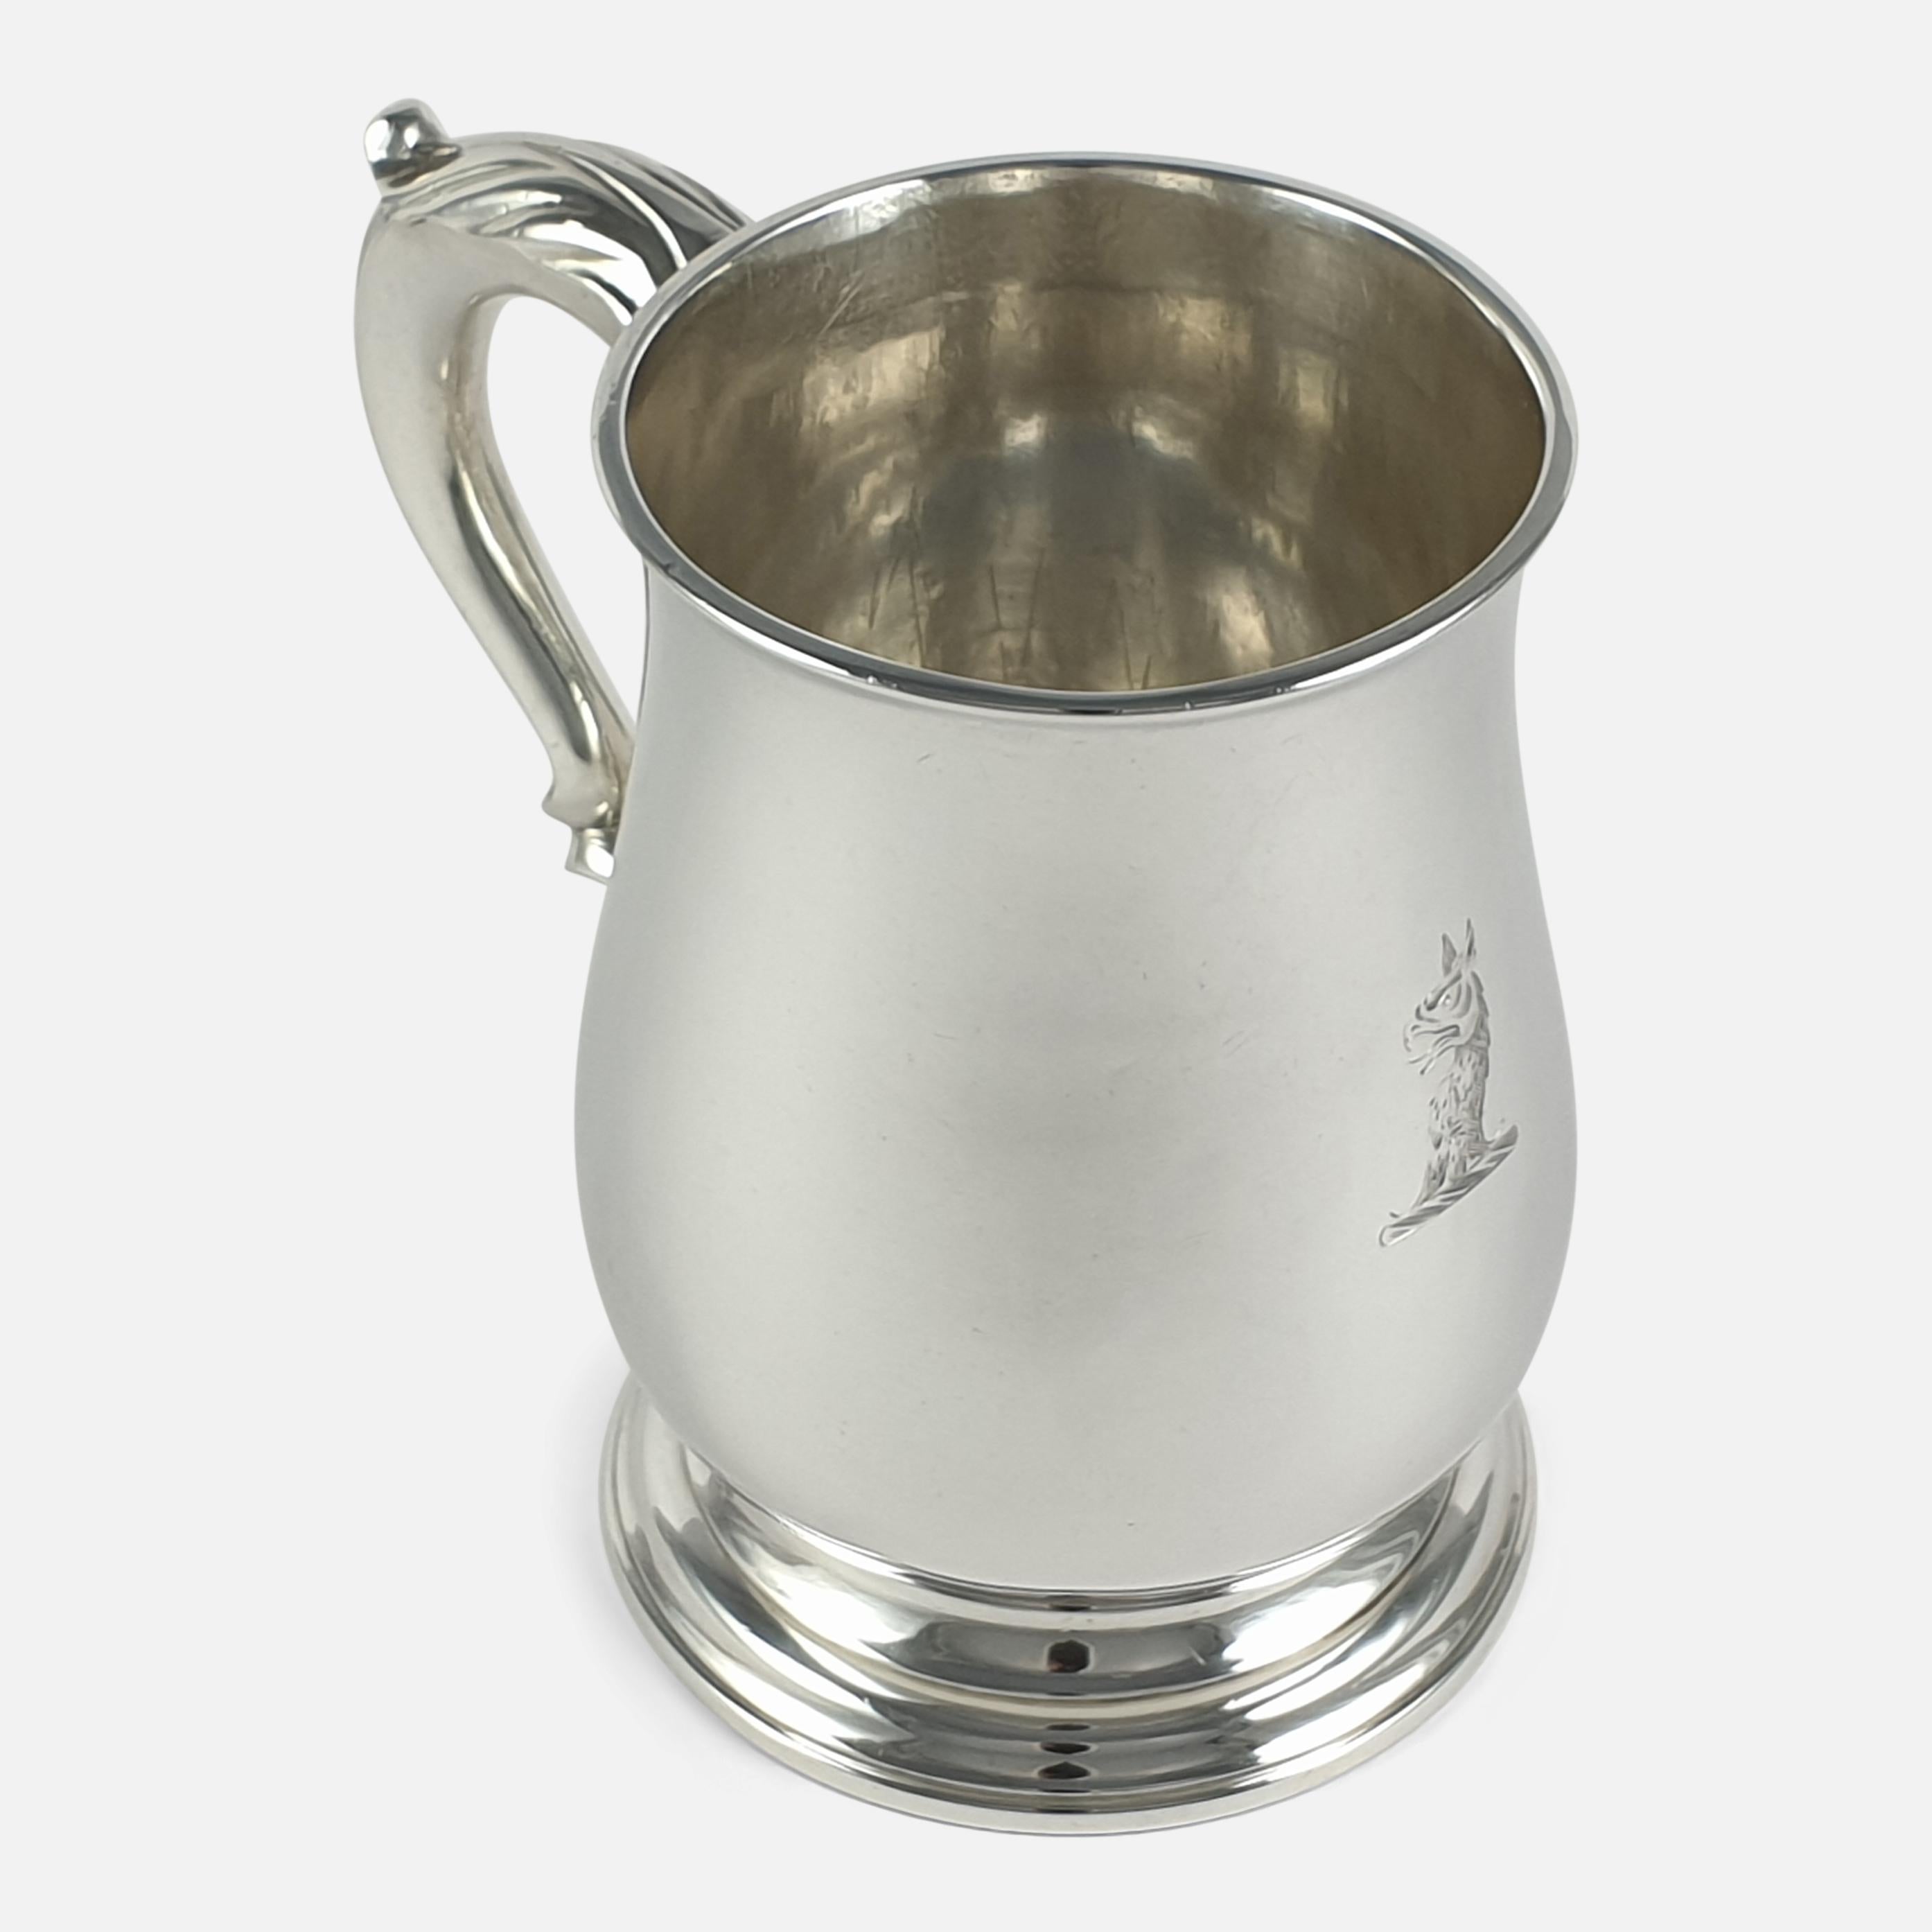 An early George III sterling silver mug by John Robinson II, London, 1766. The mug is of baluster form with a spreading foot and a leaf-capped scroll handle, and engraved with a family crest. It is hallmarked with the makers mark JR (John Robinson